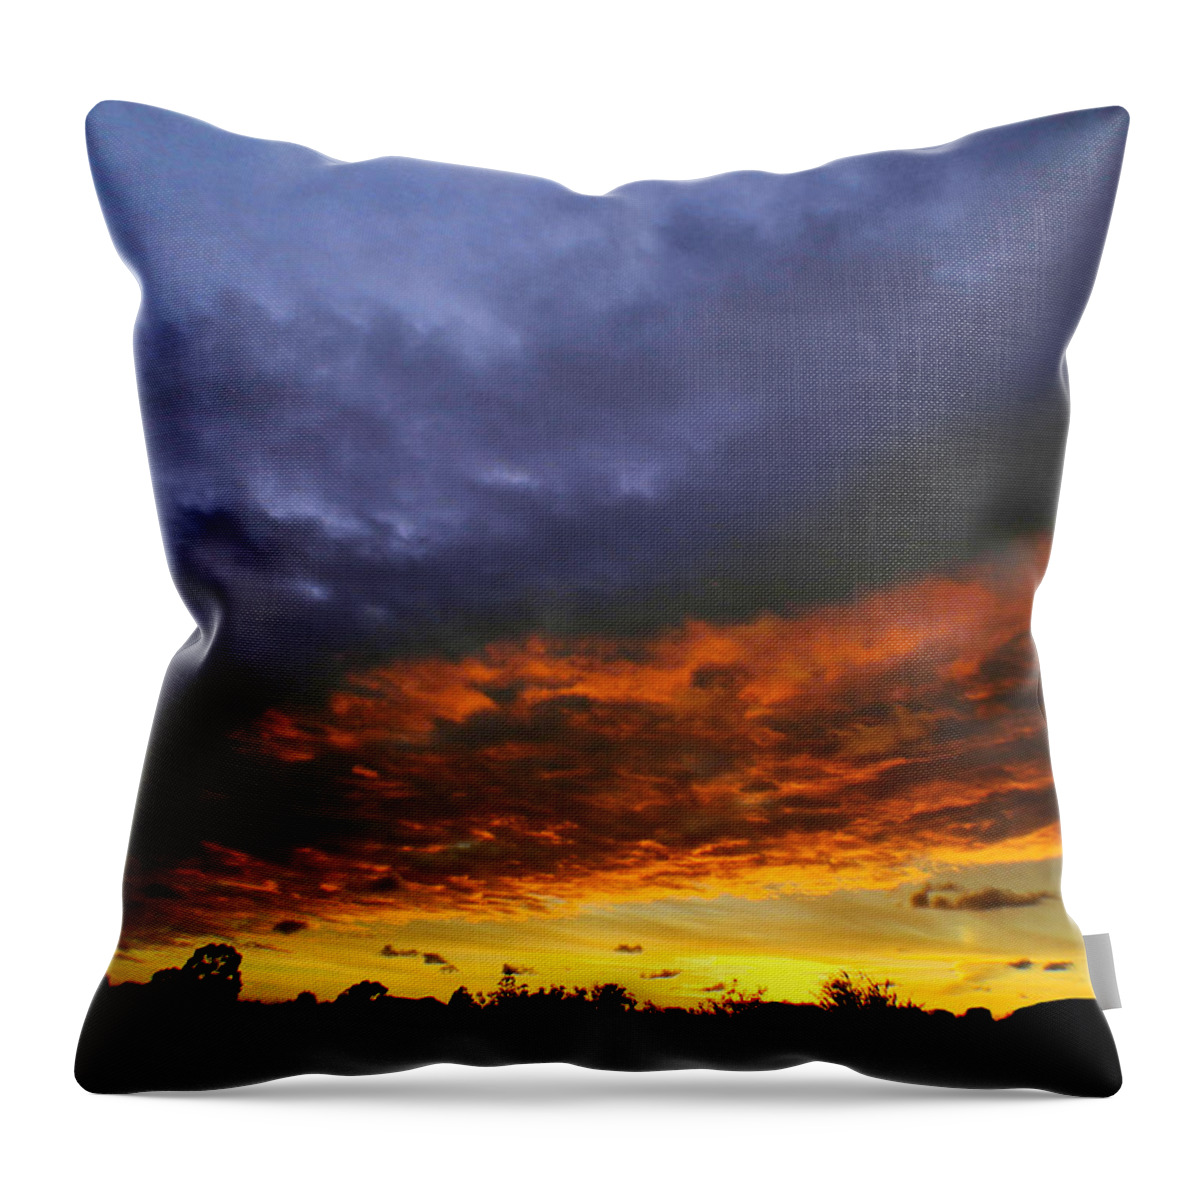 Sunset Throw Pillow featuring the photograph Triple Sunset by Mark Blauhoefer